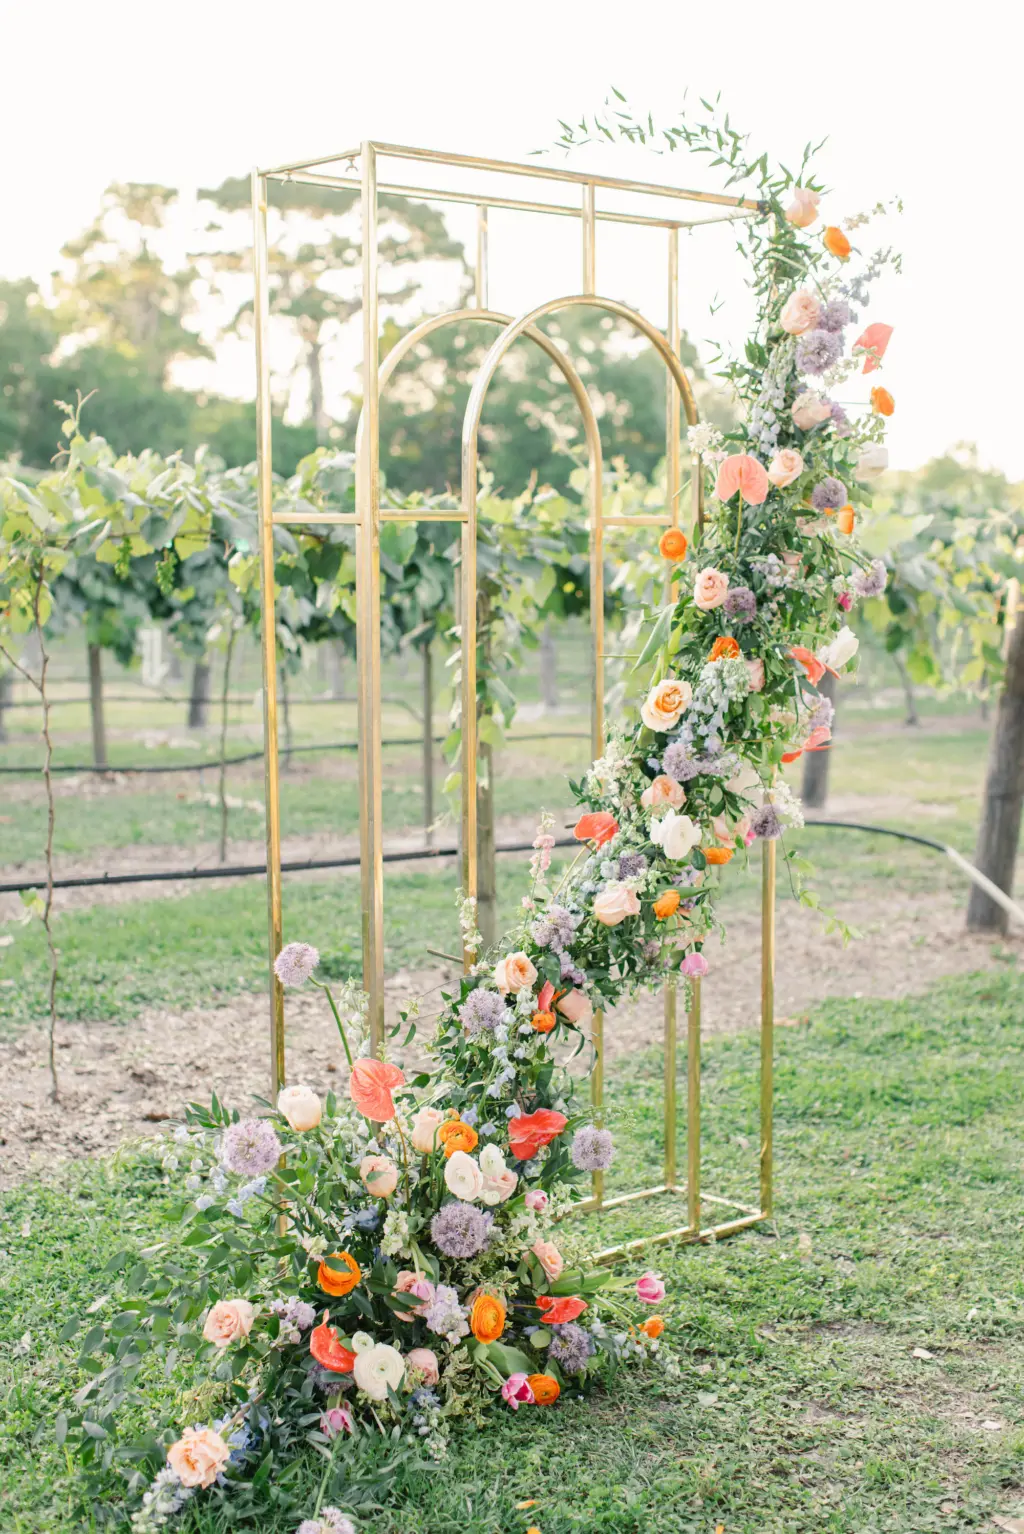 Copper Wedding Ceremony Arch with Whimsical Cascading Pastel Wildflower Floral Arrangement | Cane Rattan Wedding Chairs | Sarasota Vineyard Wedding Inspiration | Tampa Bay Florist Save The Date Florida